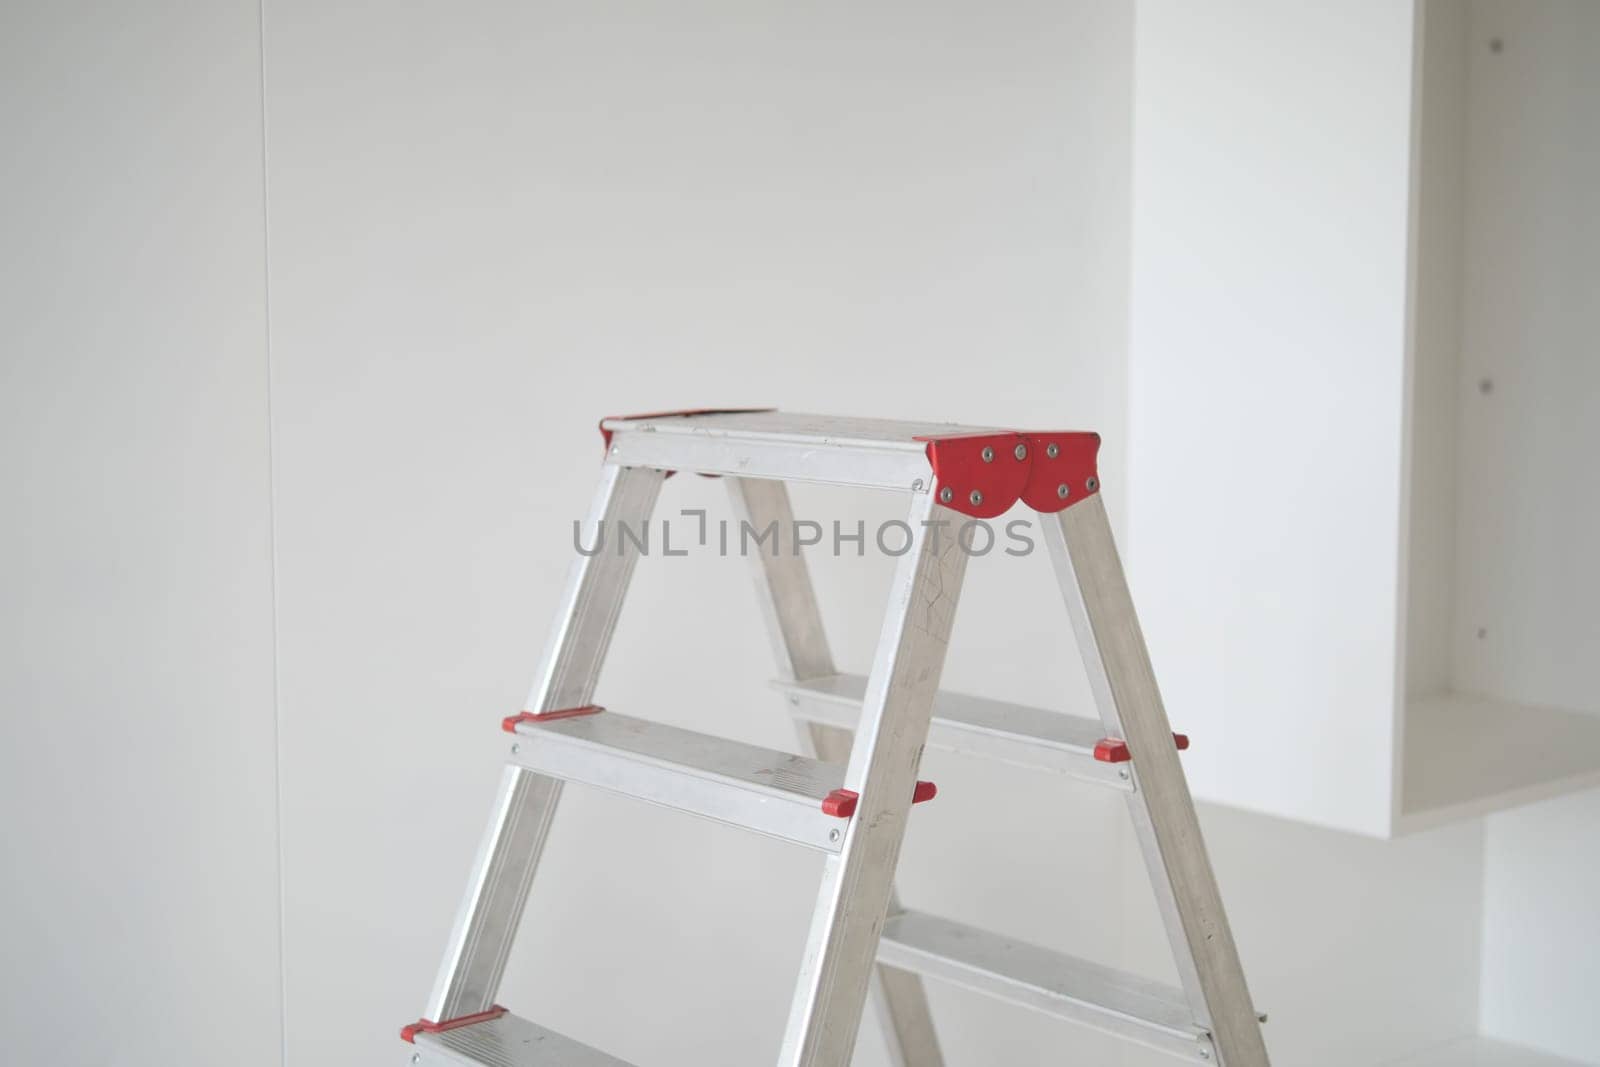 Metal ladder standing in empty room, renovation and improvement concept. by towfiq007